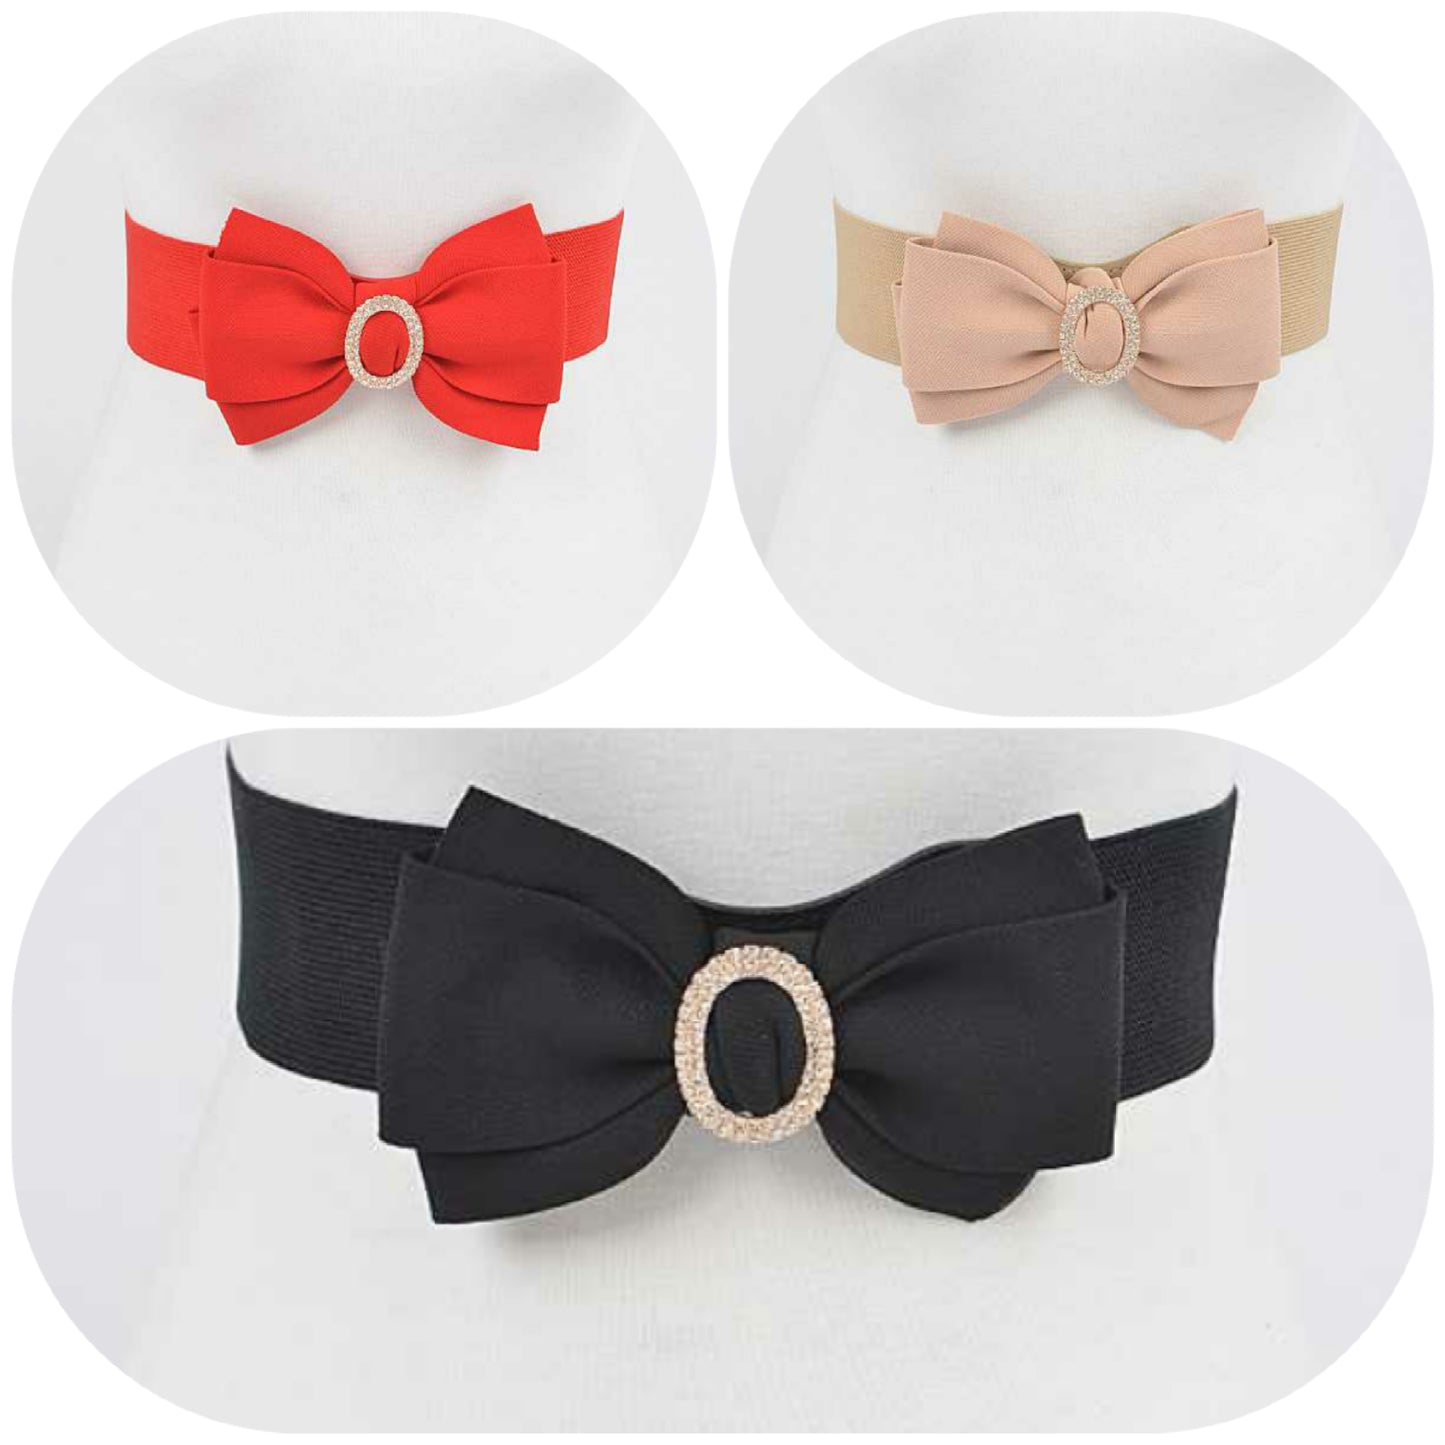 Classy Bow Belt with Rhinestone Accents